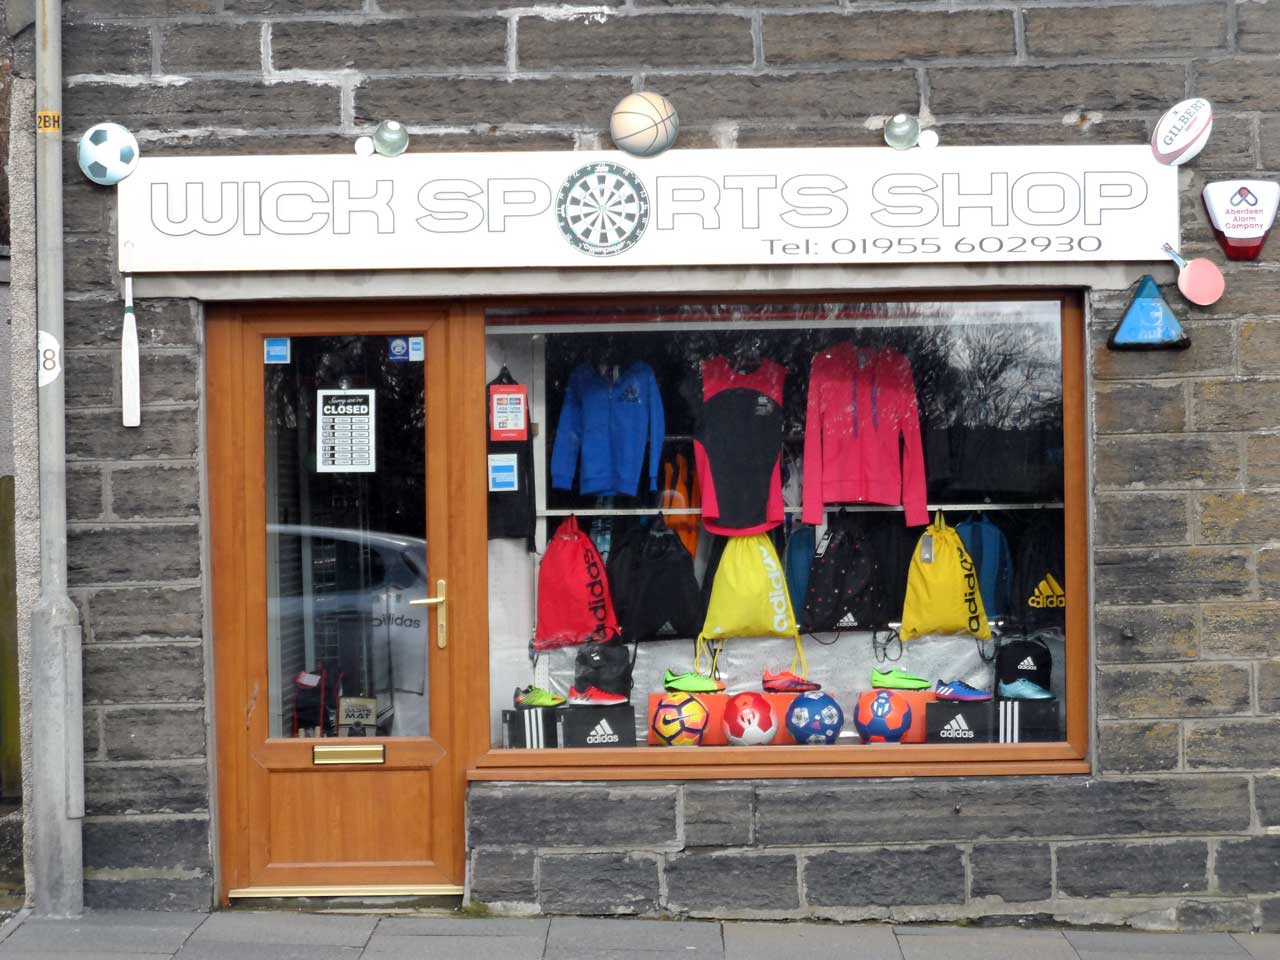 Photo: High Street, Wick - Sunday 19th March 2017